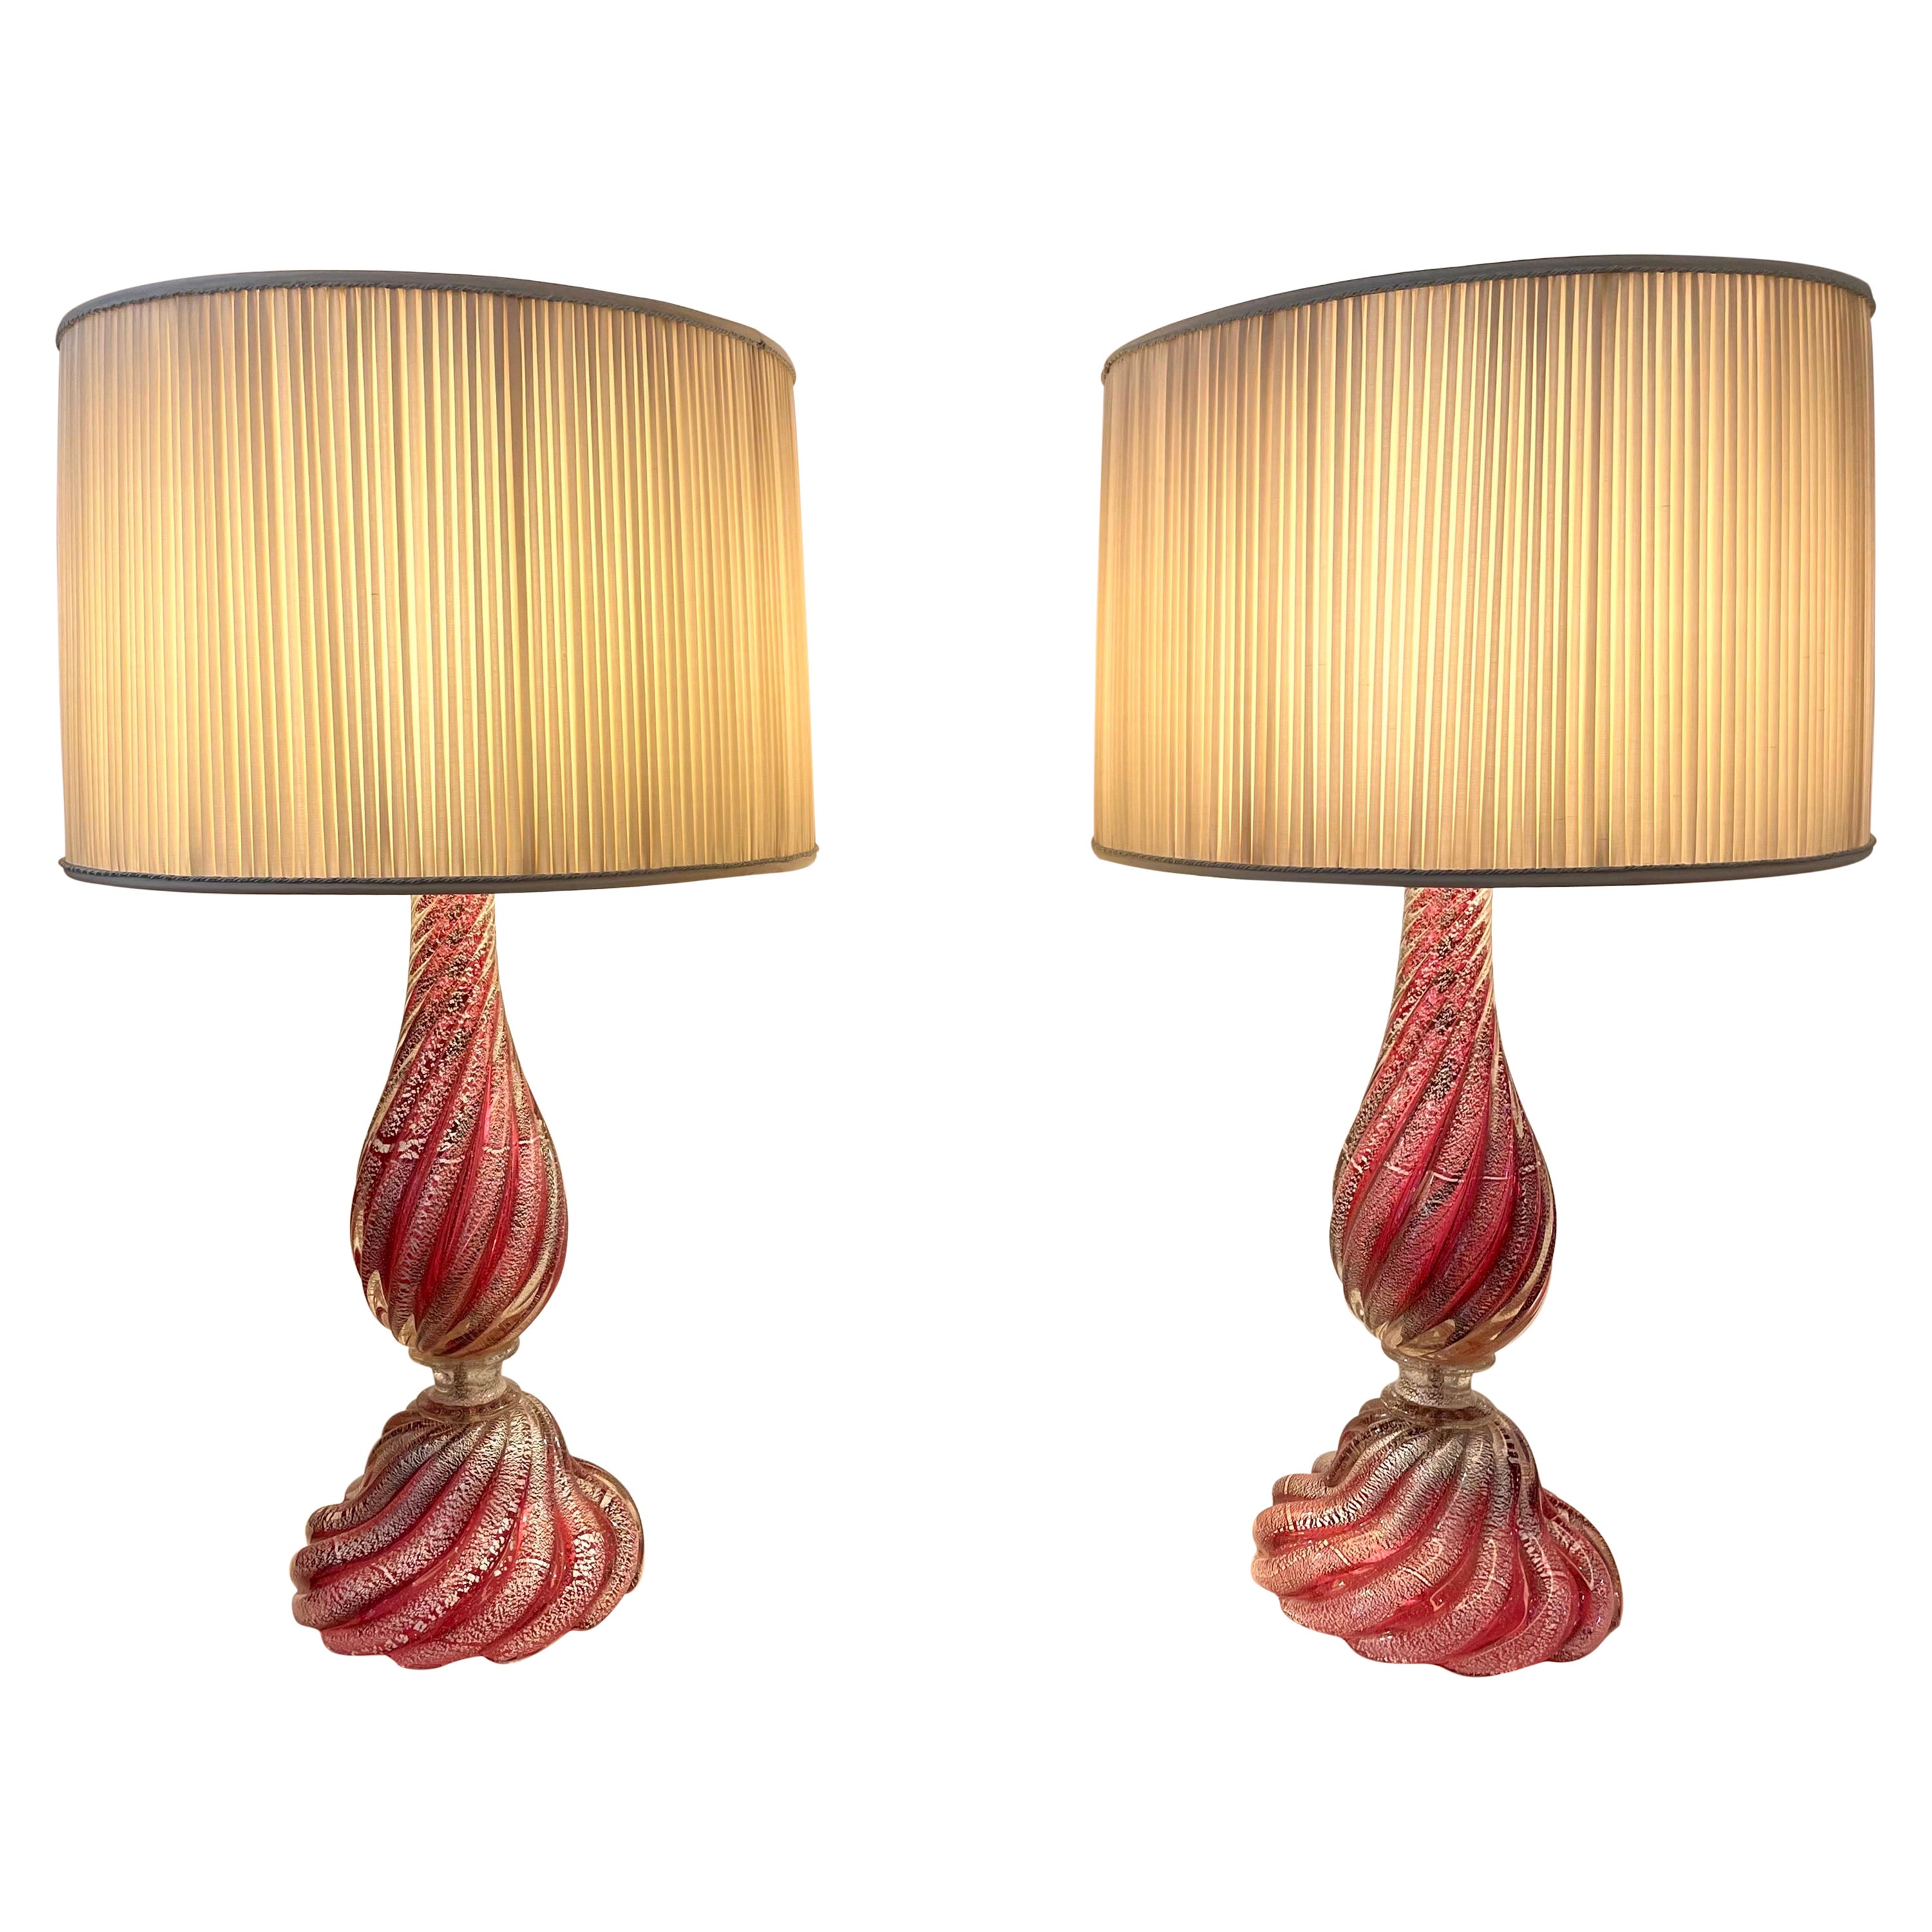 Oversized Raspberry Murano Glass Lamps W/ Silver Foil Inclusions by Barovier